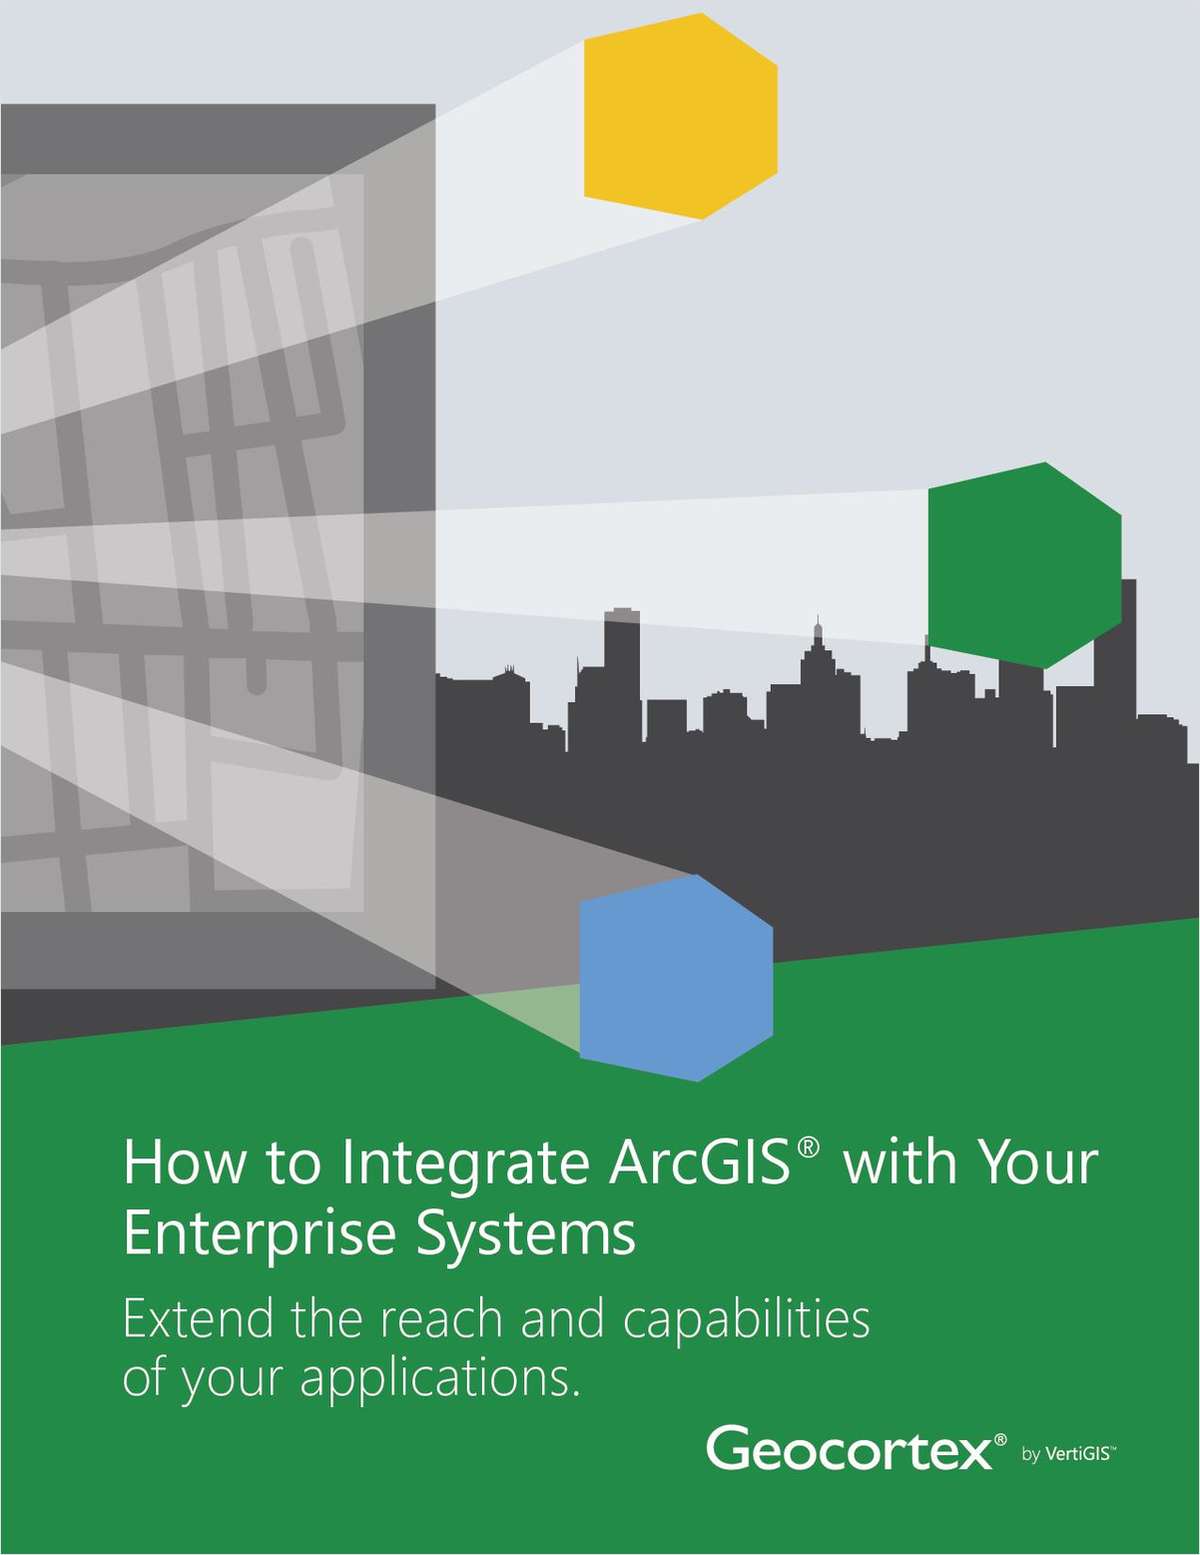 How to Integrate ArcGIS® with Enterprise Systems like Laserfiche